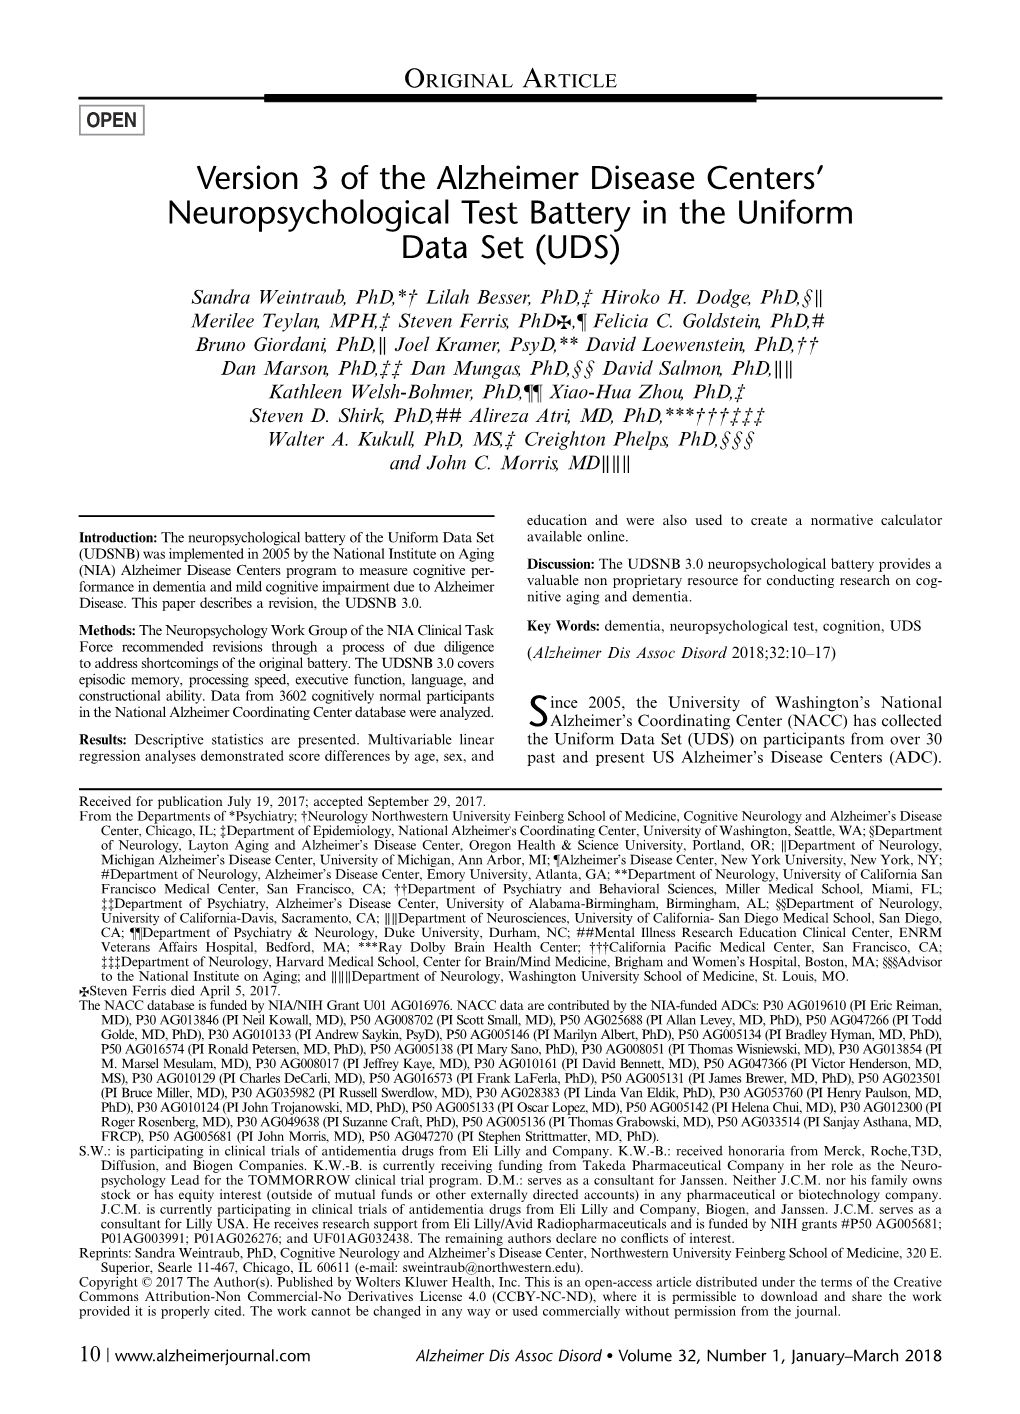 Version 3 of the Alzheimer Disease Centers’ Neuropsychological Test Battery in the Uniform Data Set (UDS)